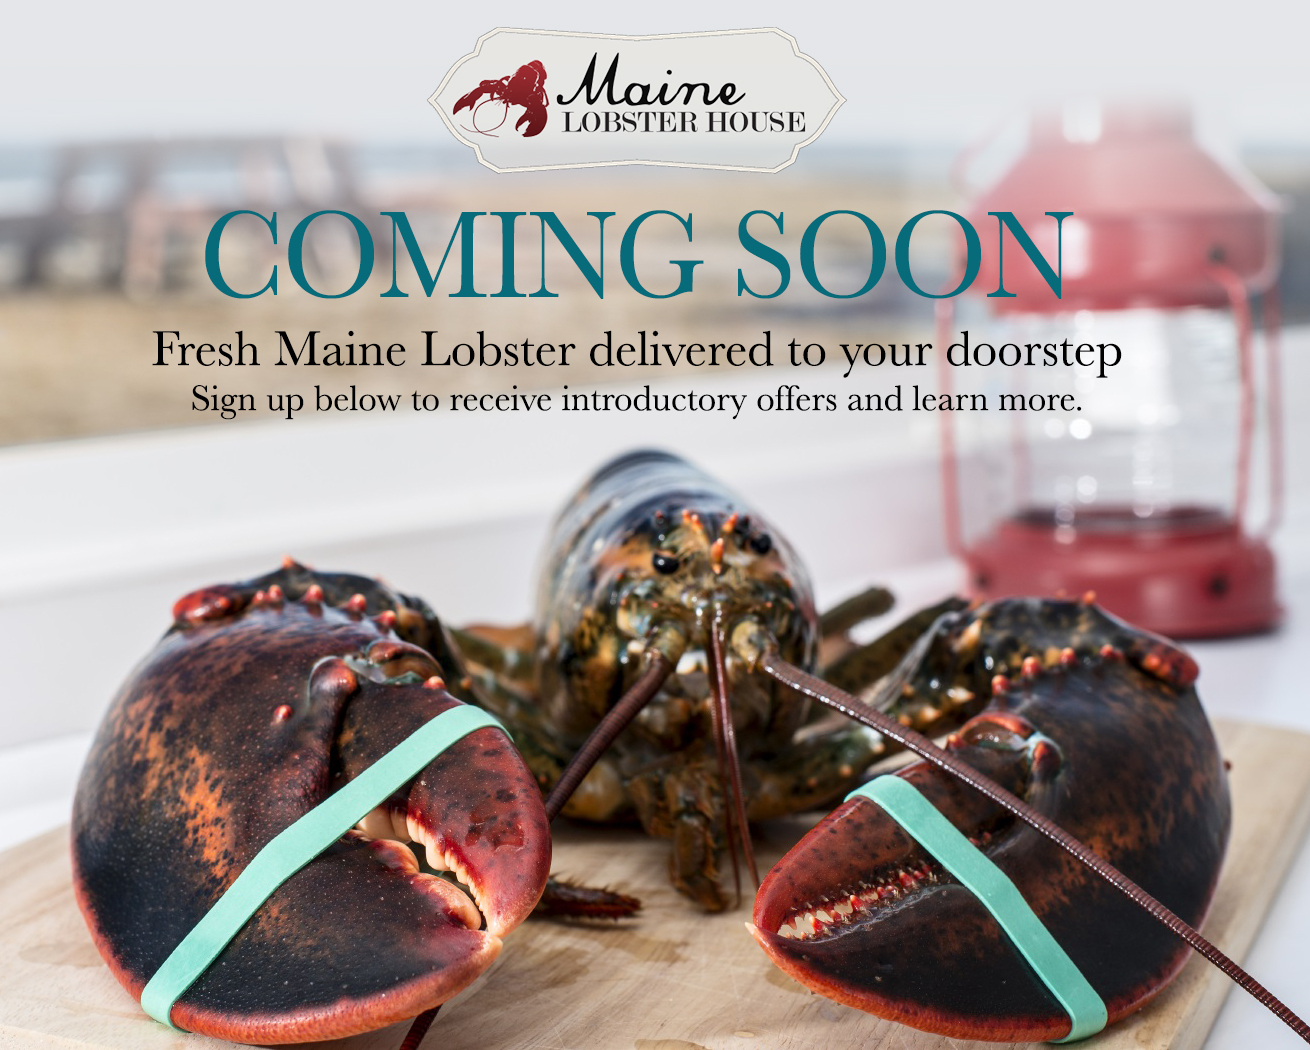 Maine Lobster House - Coming Soon!